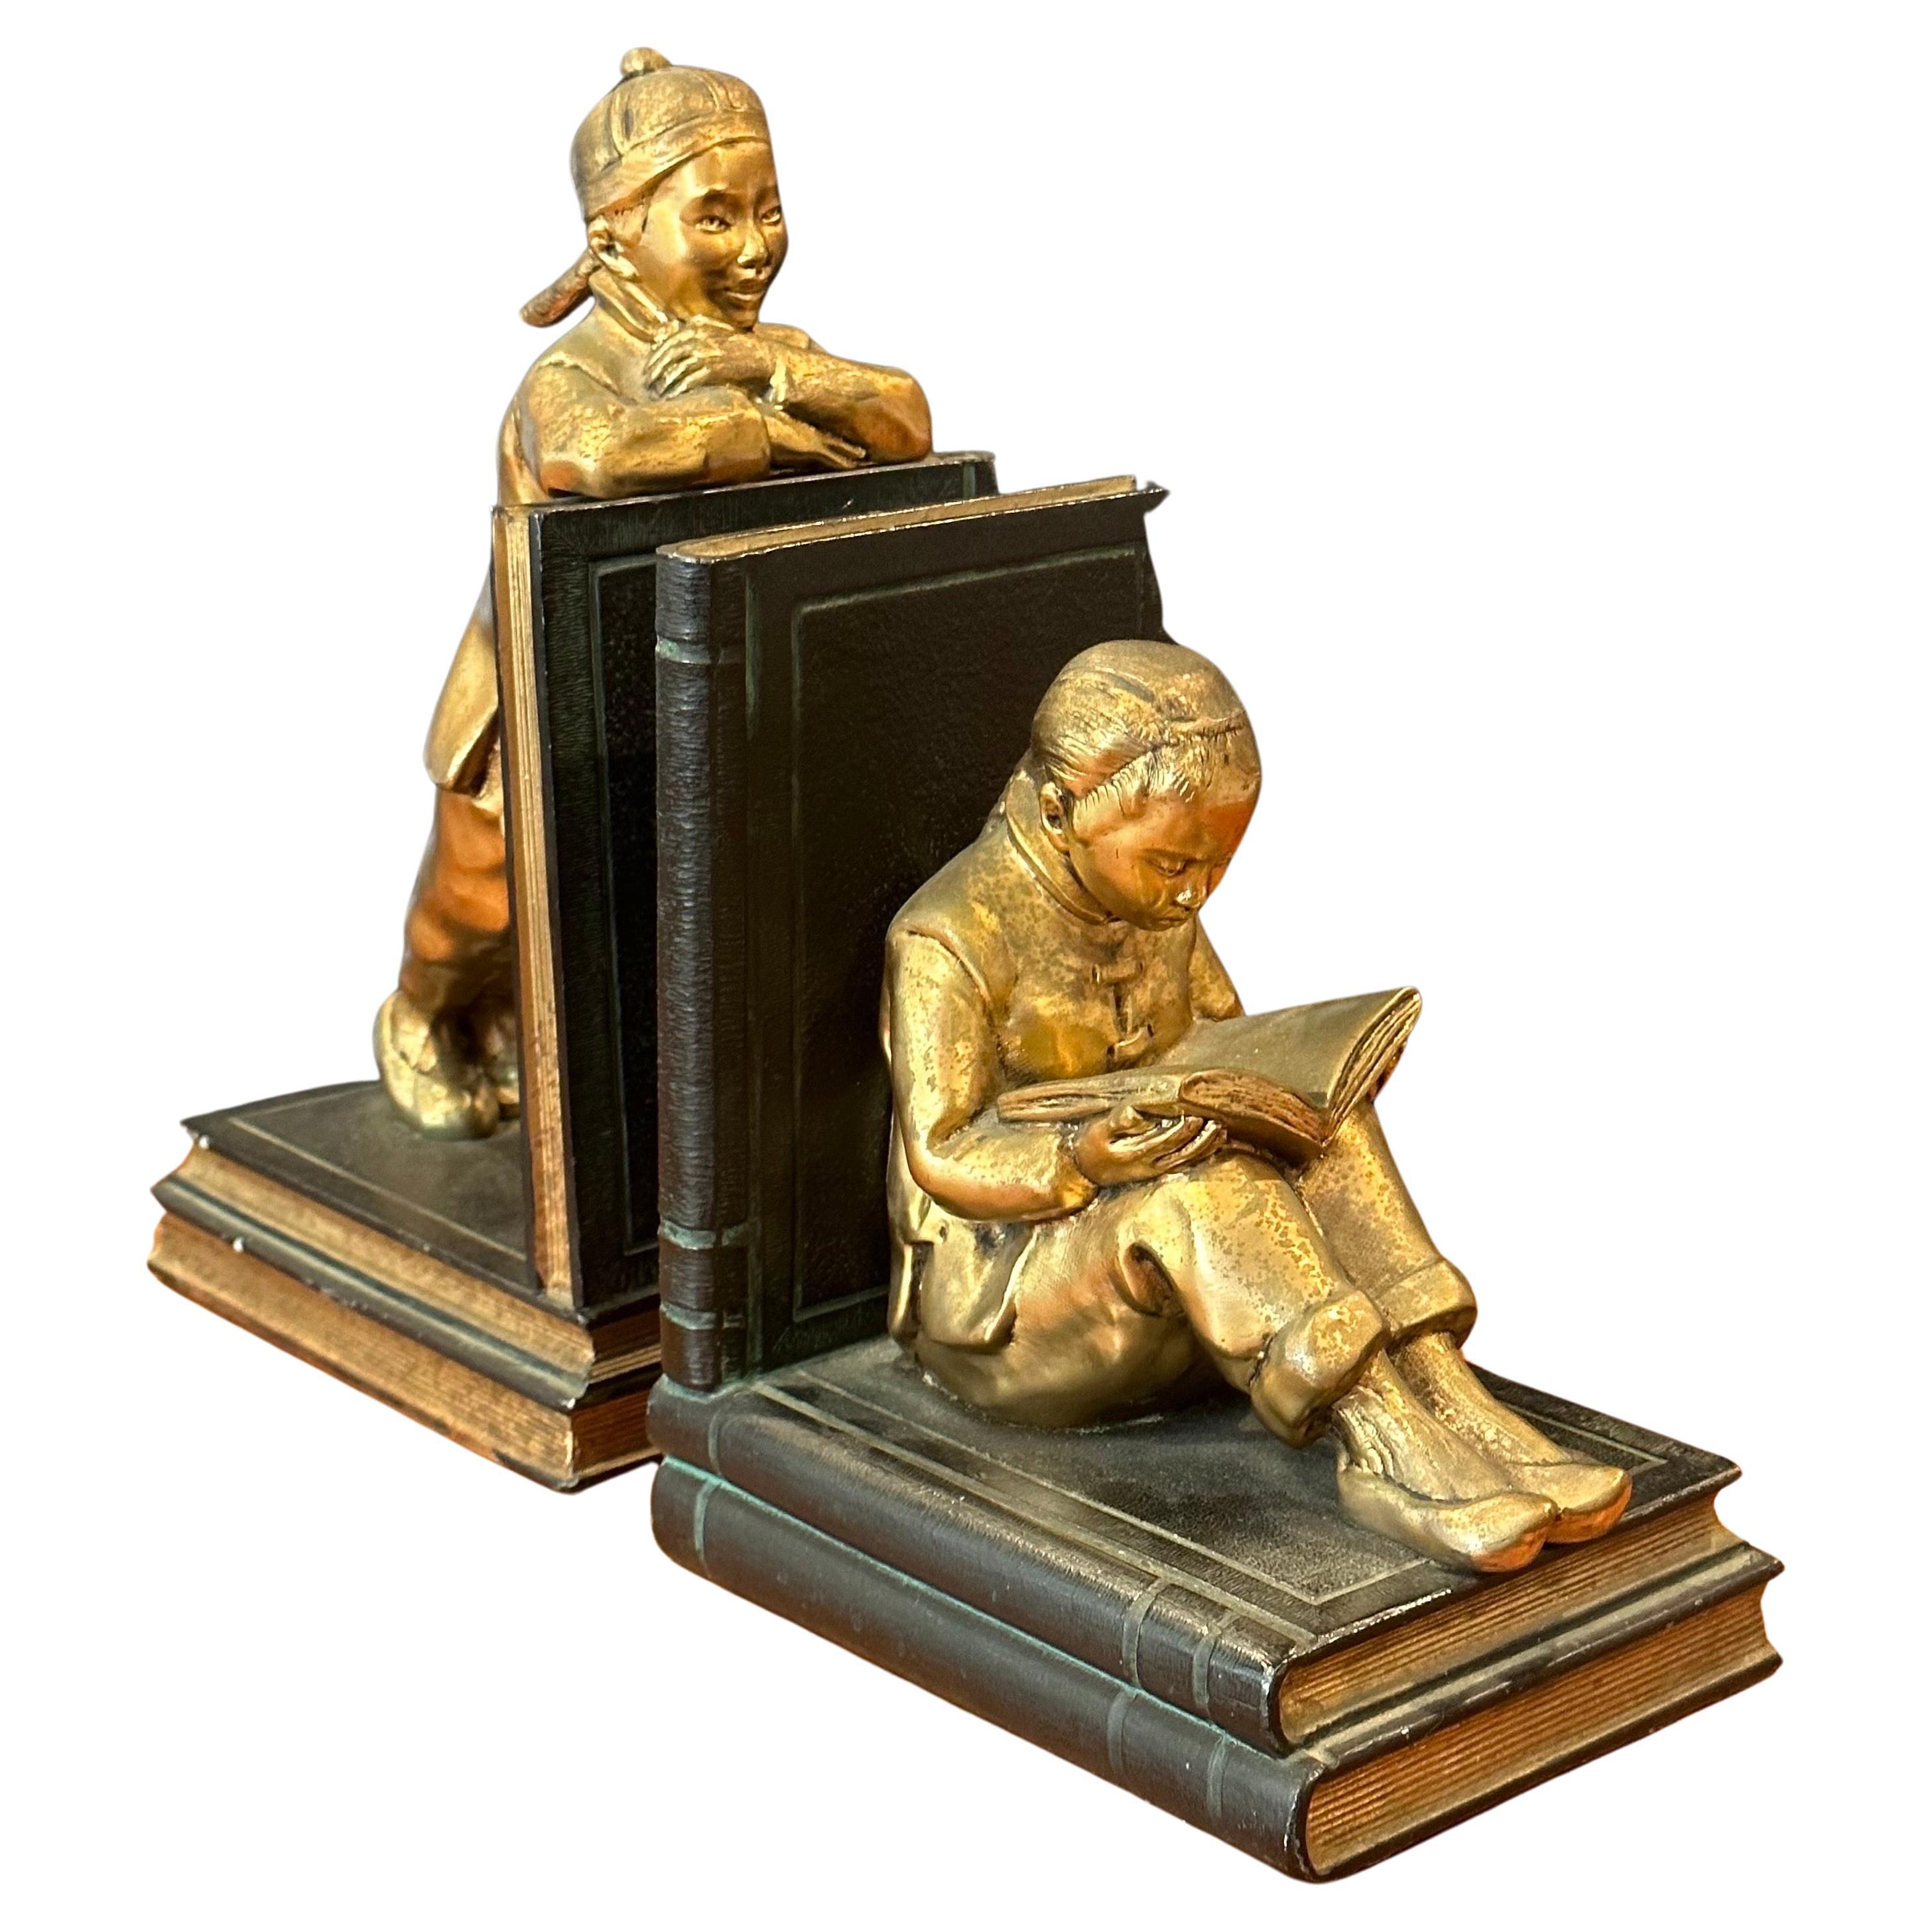 A fabulous vintage pair of gilted metal clad Chinese children scholar bookends by Ronson Art Metal Works, circa 1930s. The bookends depict two Chinese youngsters, beautifully sculpted; the boy is patiently observing while the girl is quietly